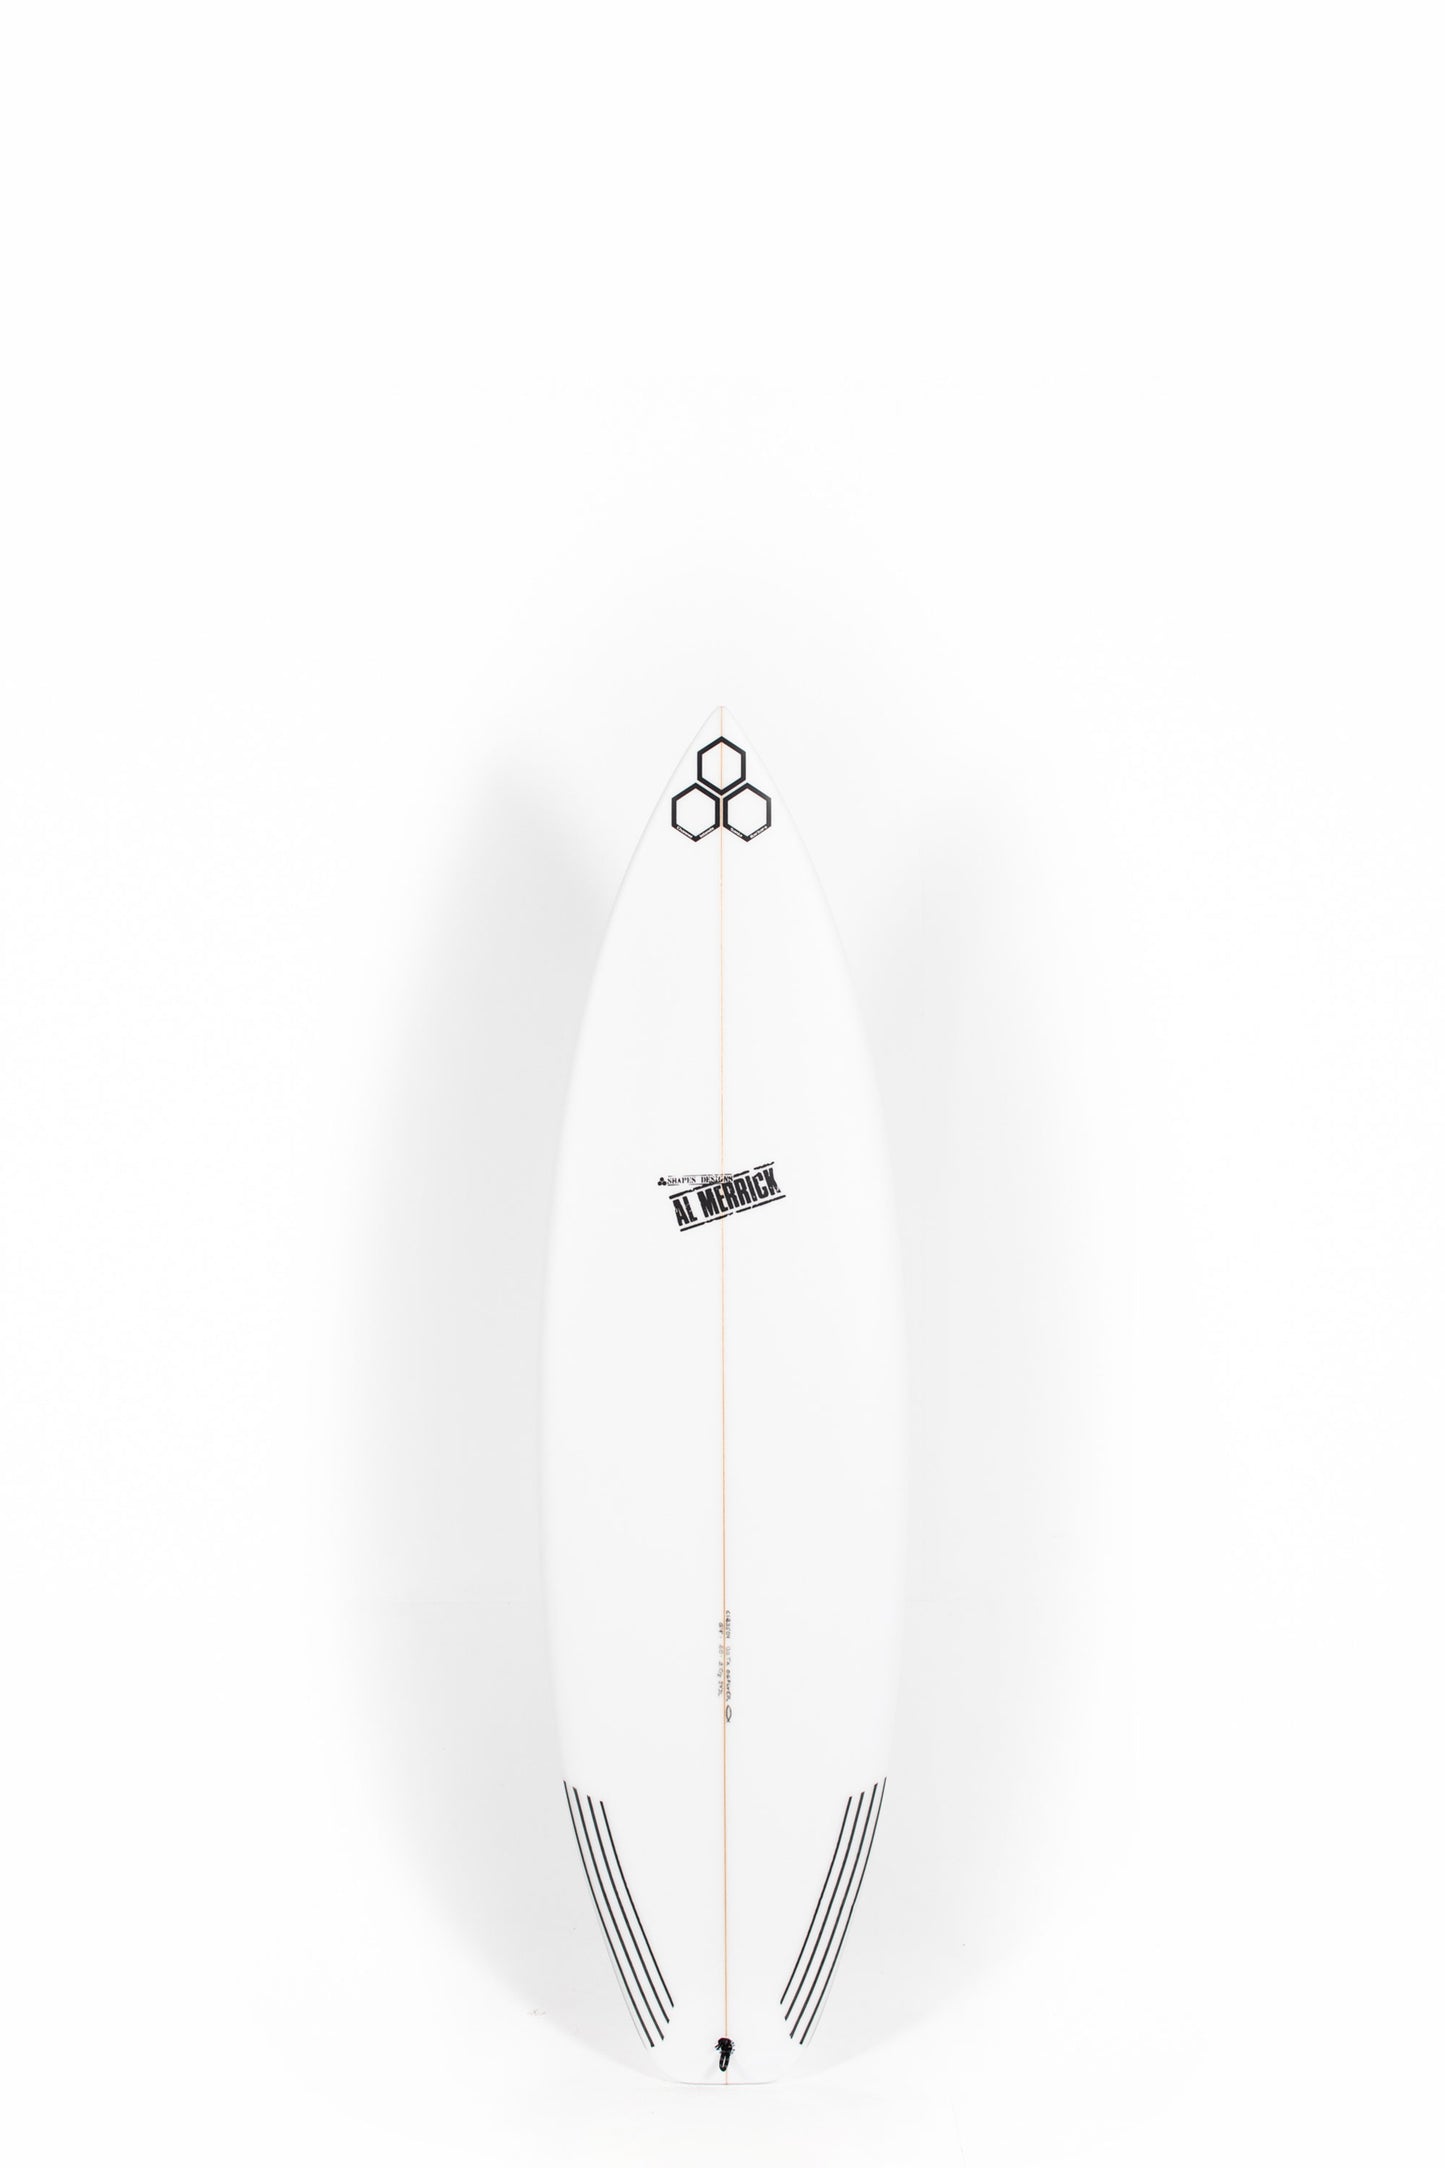 CHANNEL ISLANDS SURFBOARDS | Shop at PUKAS SURF SHOP – Tagged 